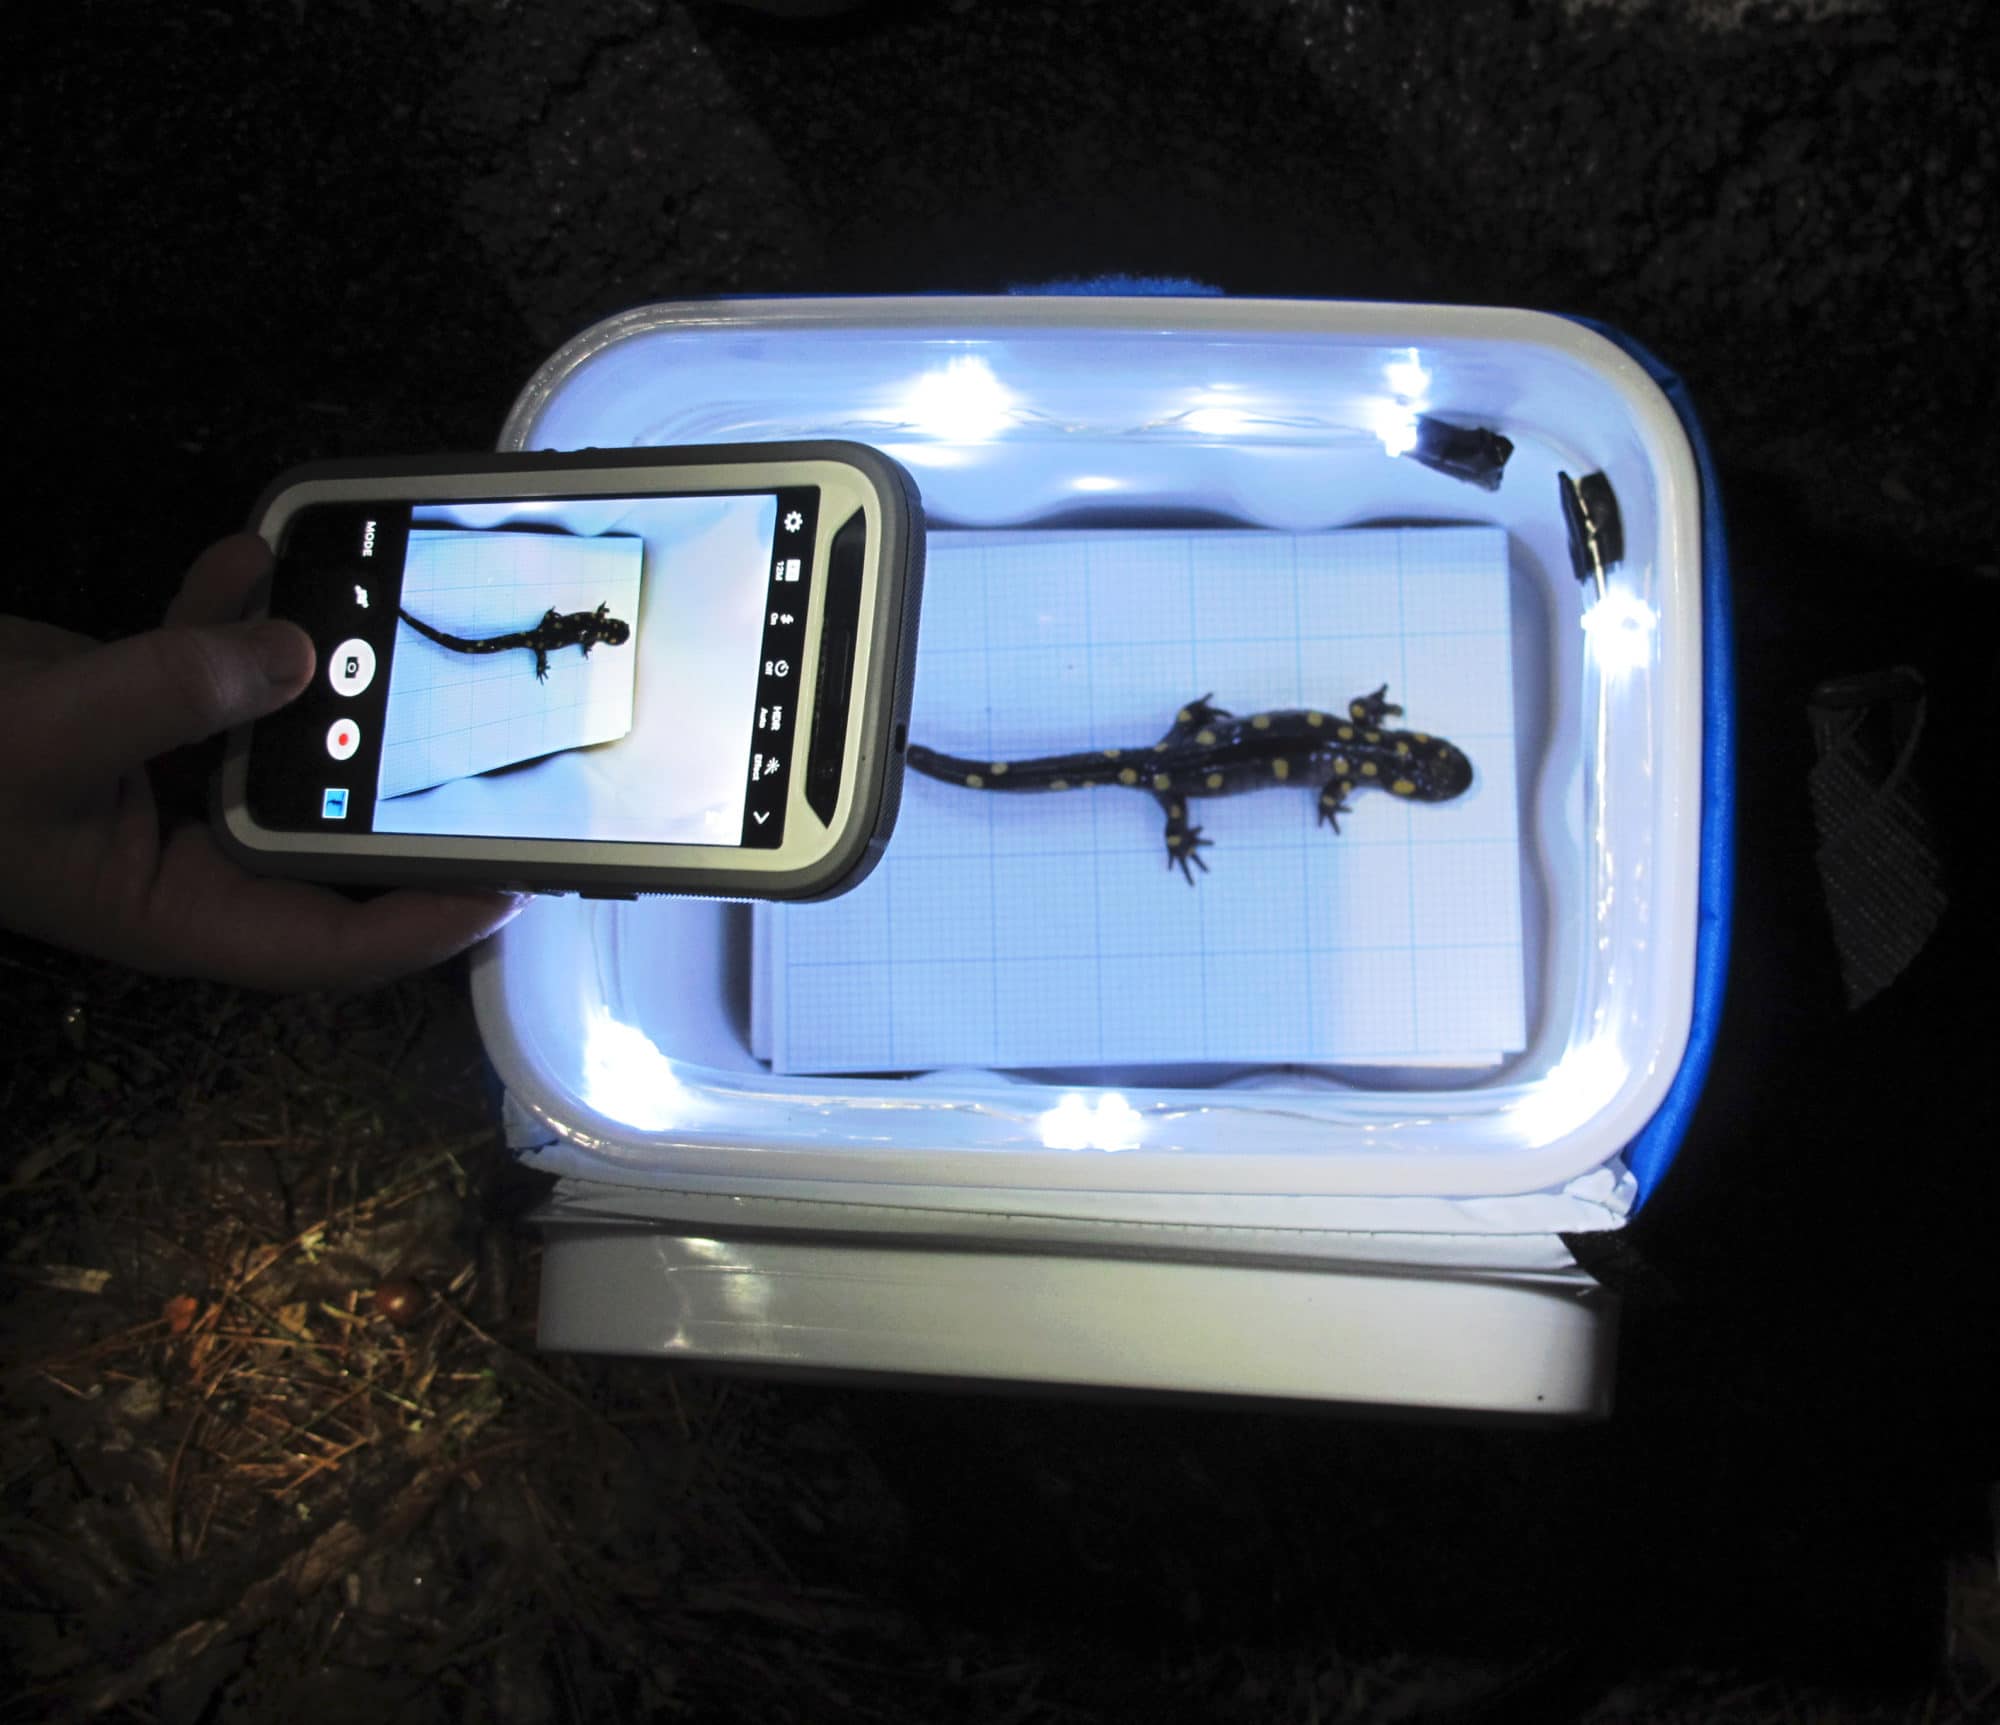 A person uses their cell phone to take a photograph of a spotted salamander's spot pattern. (photo © Brett Amy Thelen)